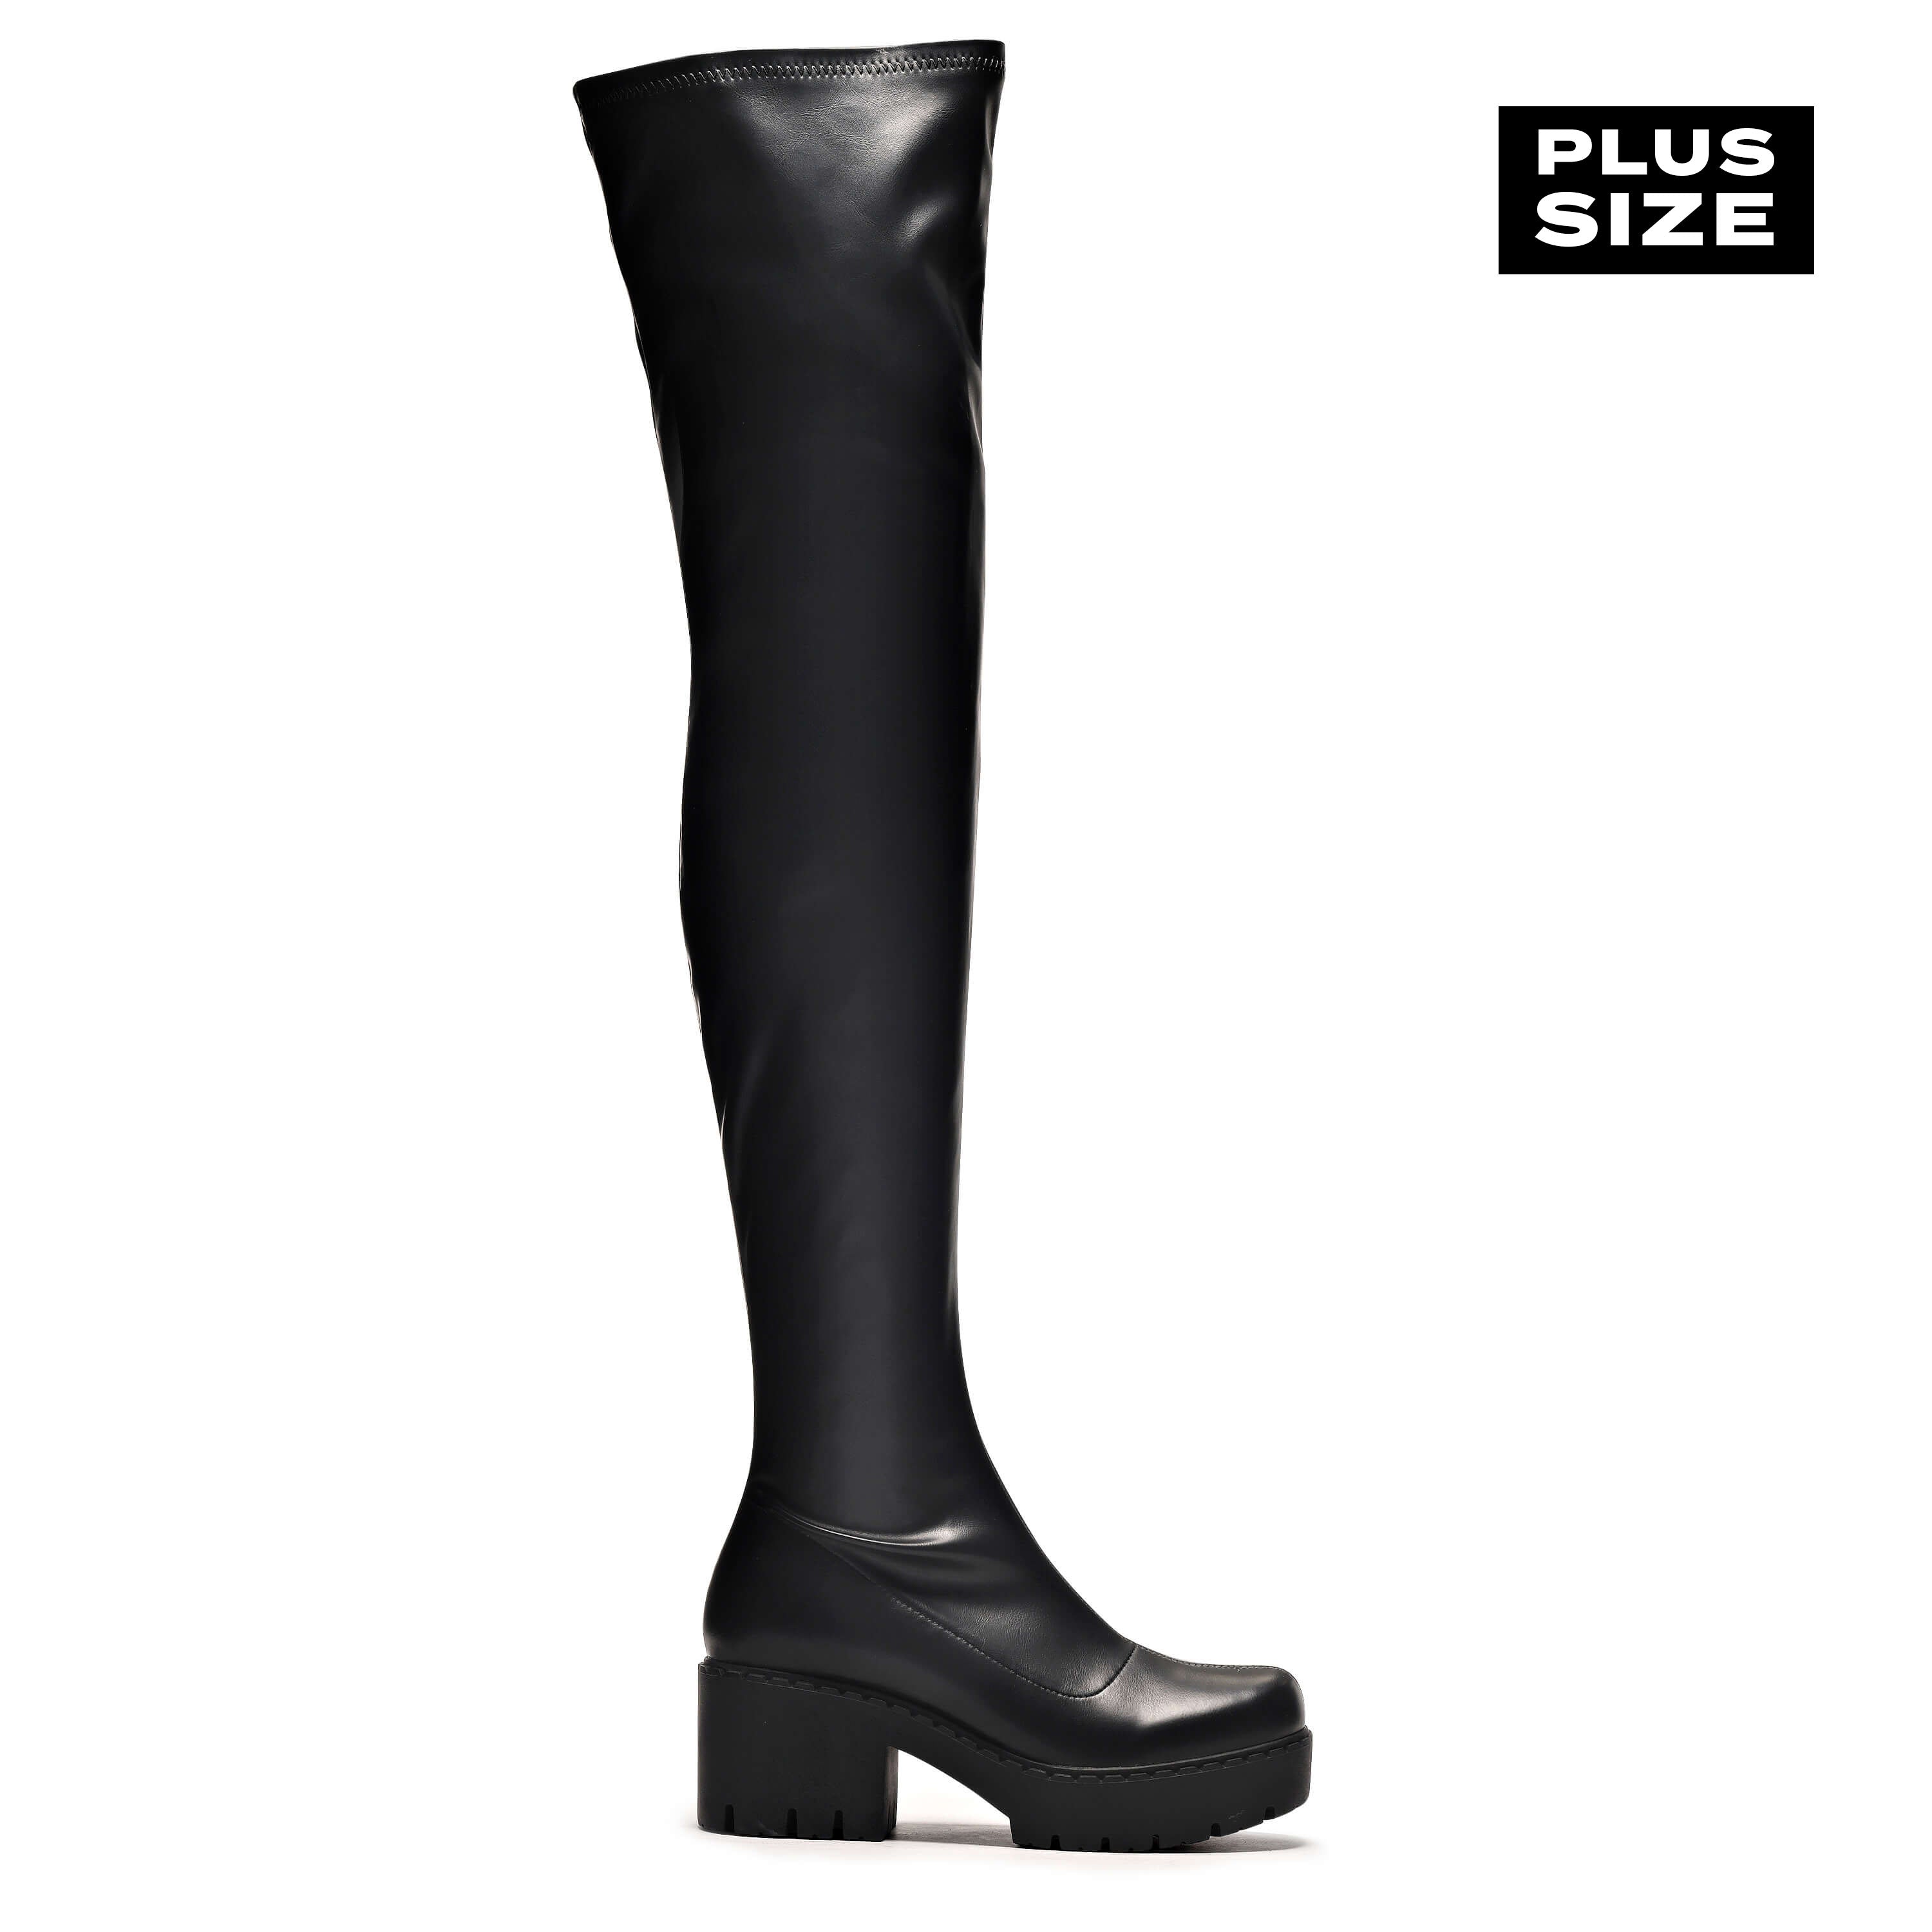 The Harmony Plus Size Thigh High Boots – KOI footwear